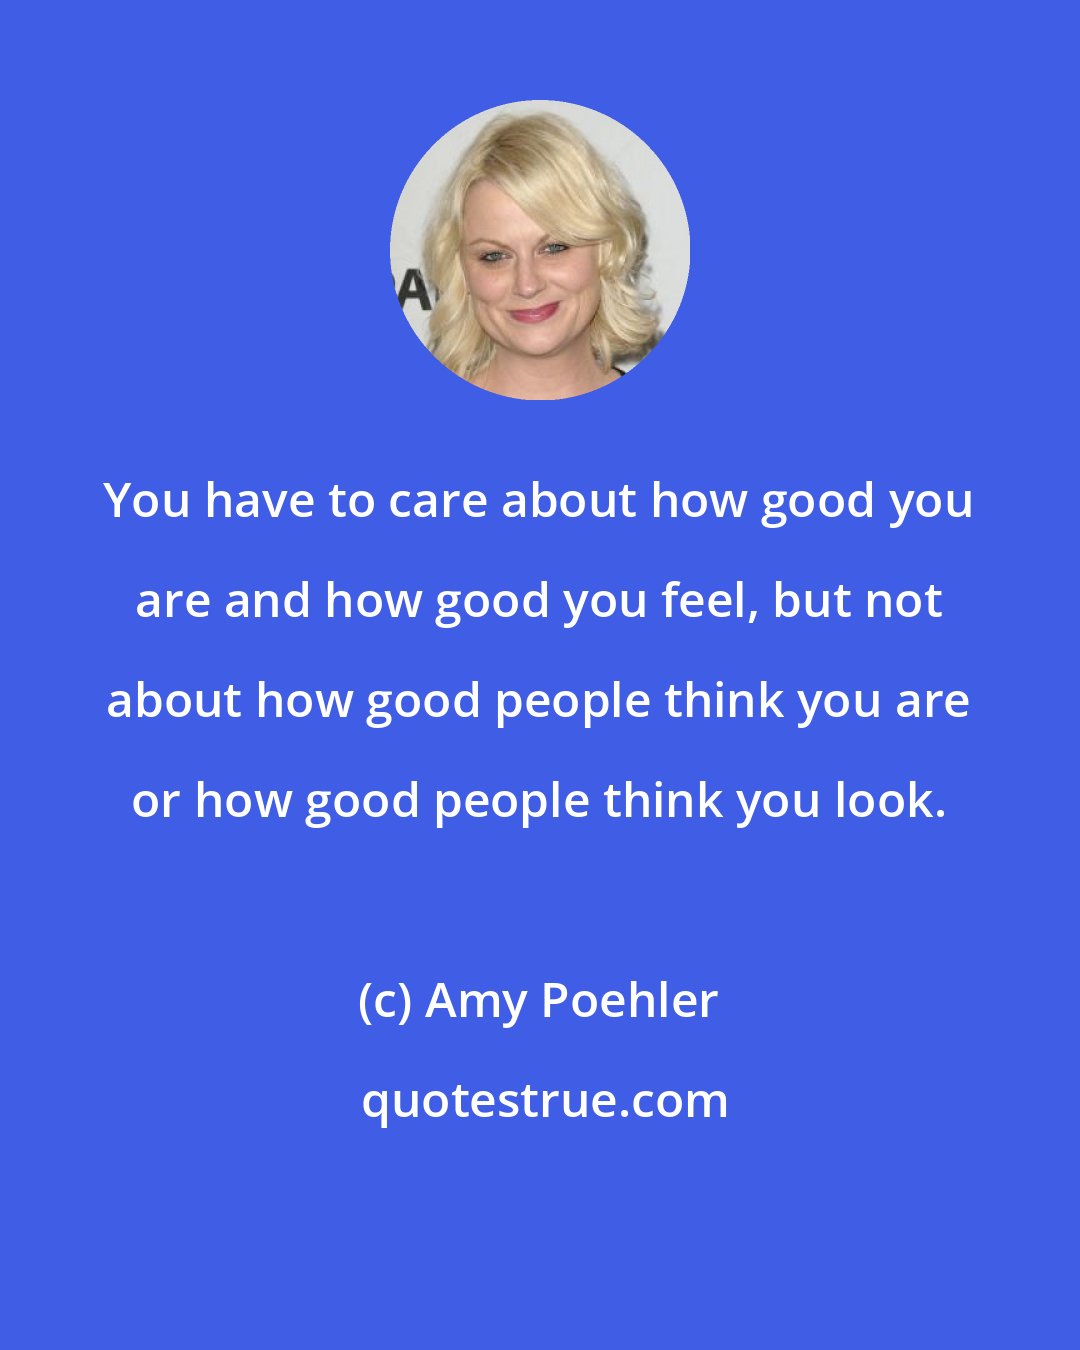 Amy Poehler: You have to care about how good you are and how good you feel, but not about how good people think you are or how good people think you look.